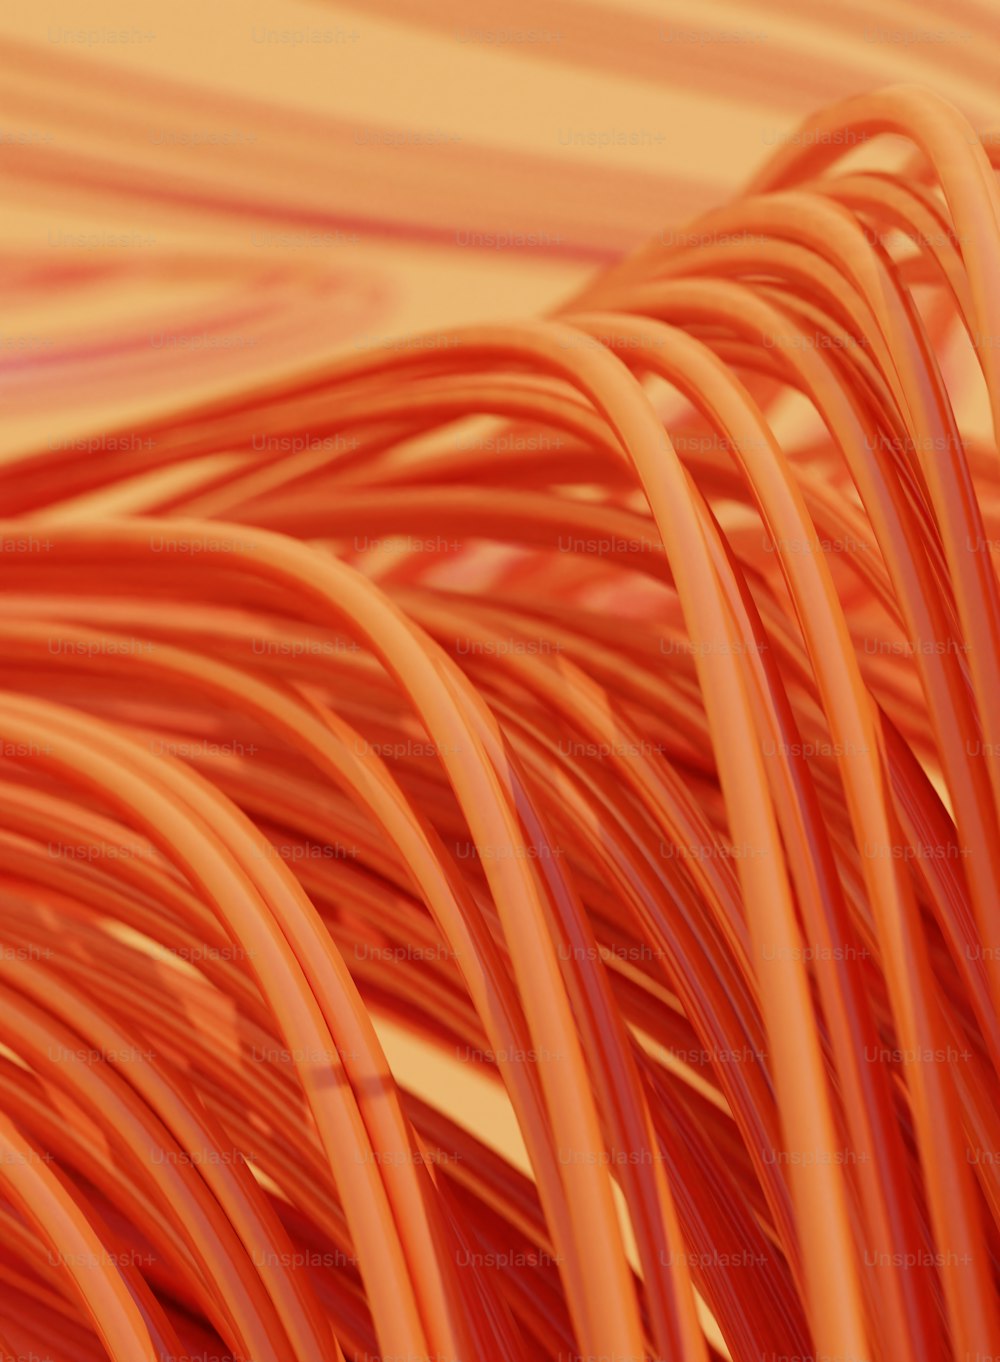 a close up of a bunch of orange wires